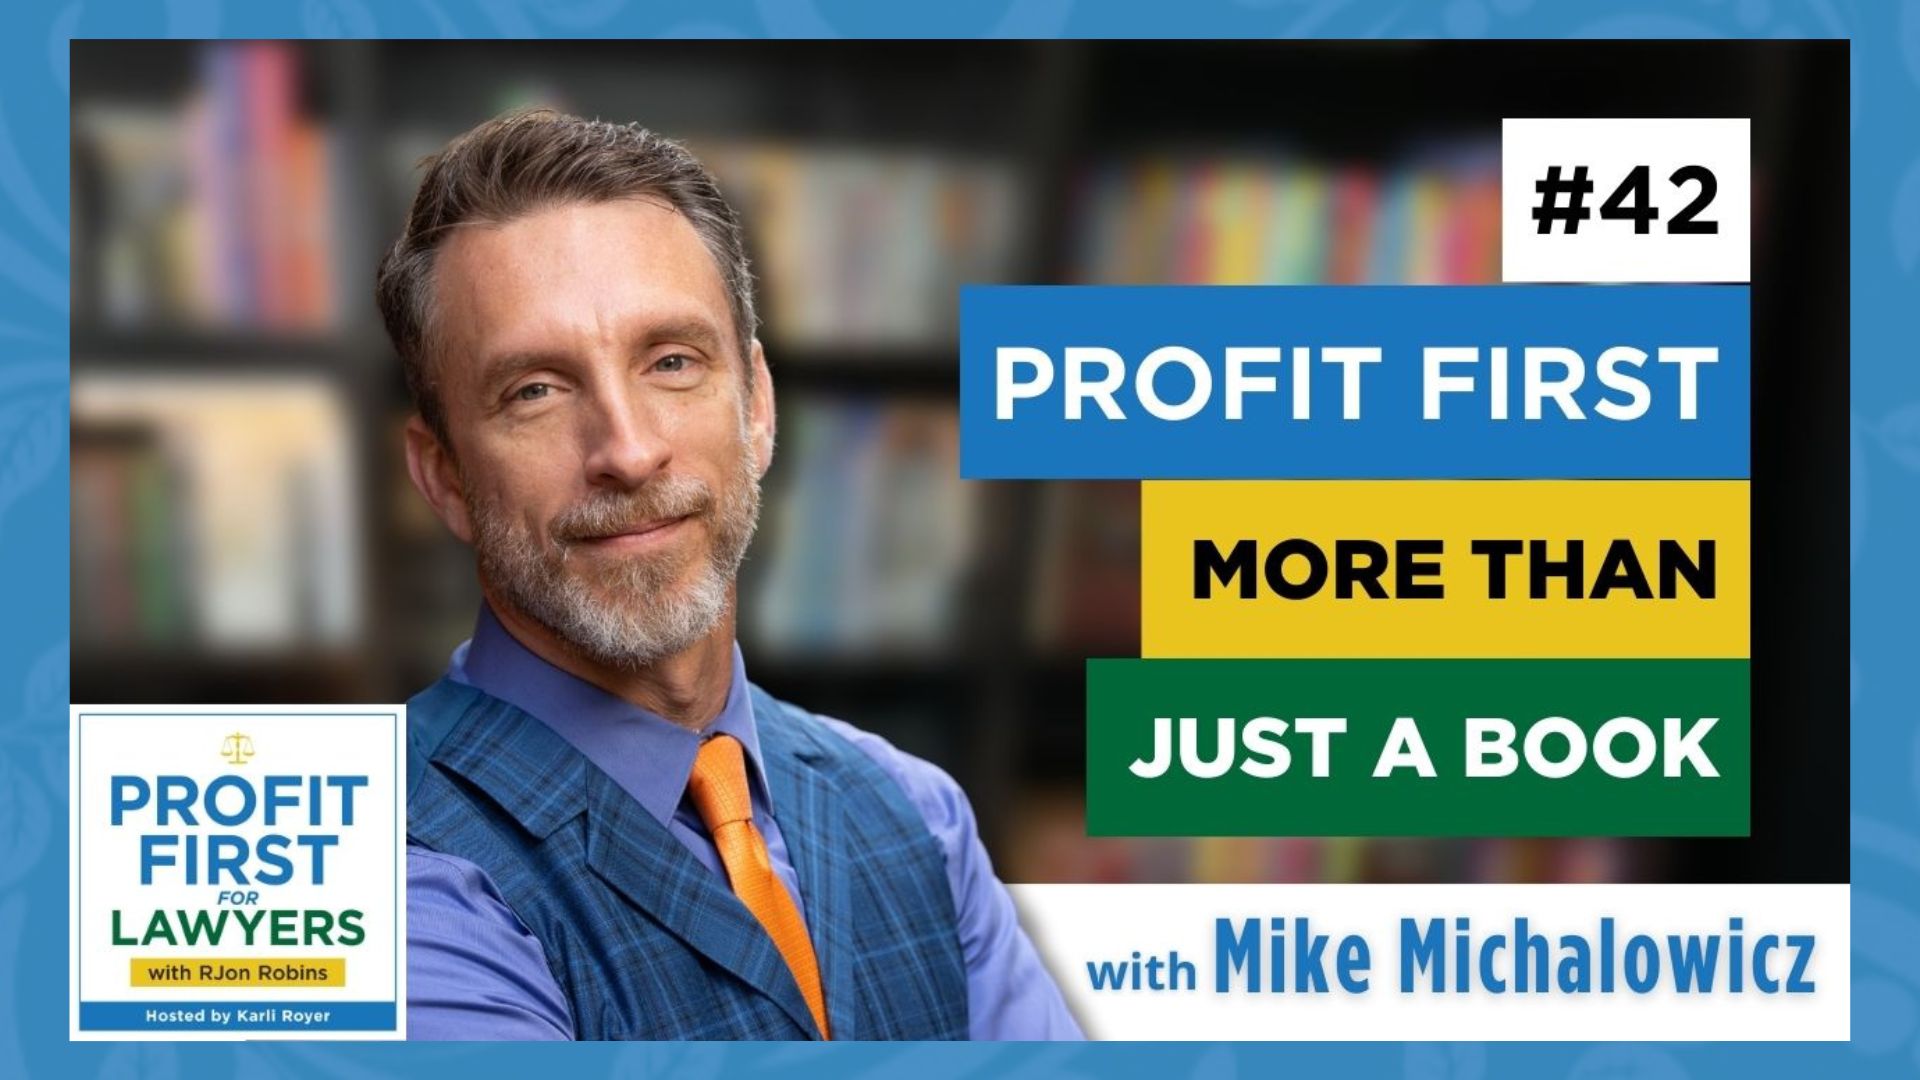 featured image of Mike Michalowicz for Episode 42 Profit First: More Than Just A Book. Image also has Profit First For Lawyers album art and the entire image/graphics is set against a blurred bookshelf with a blur paisley border